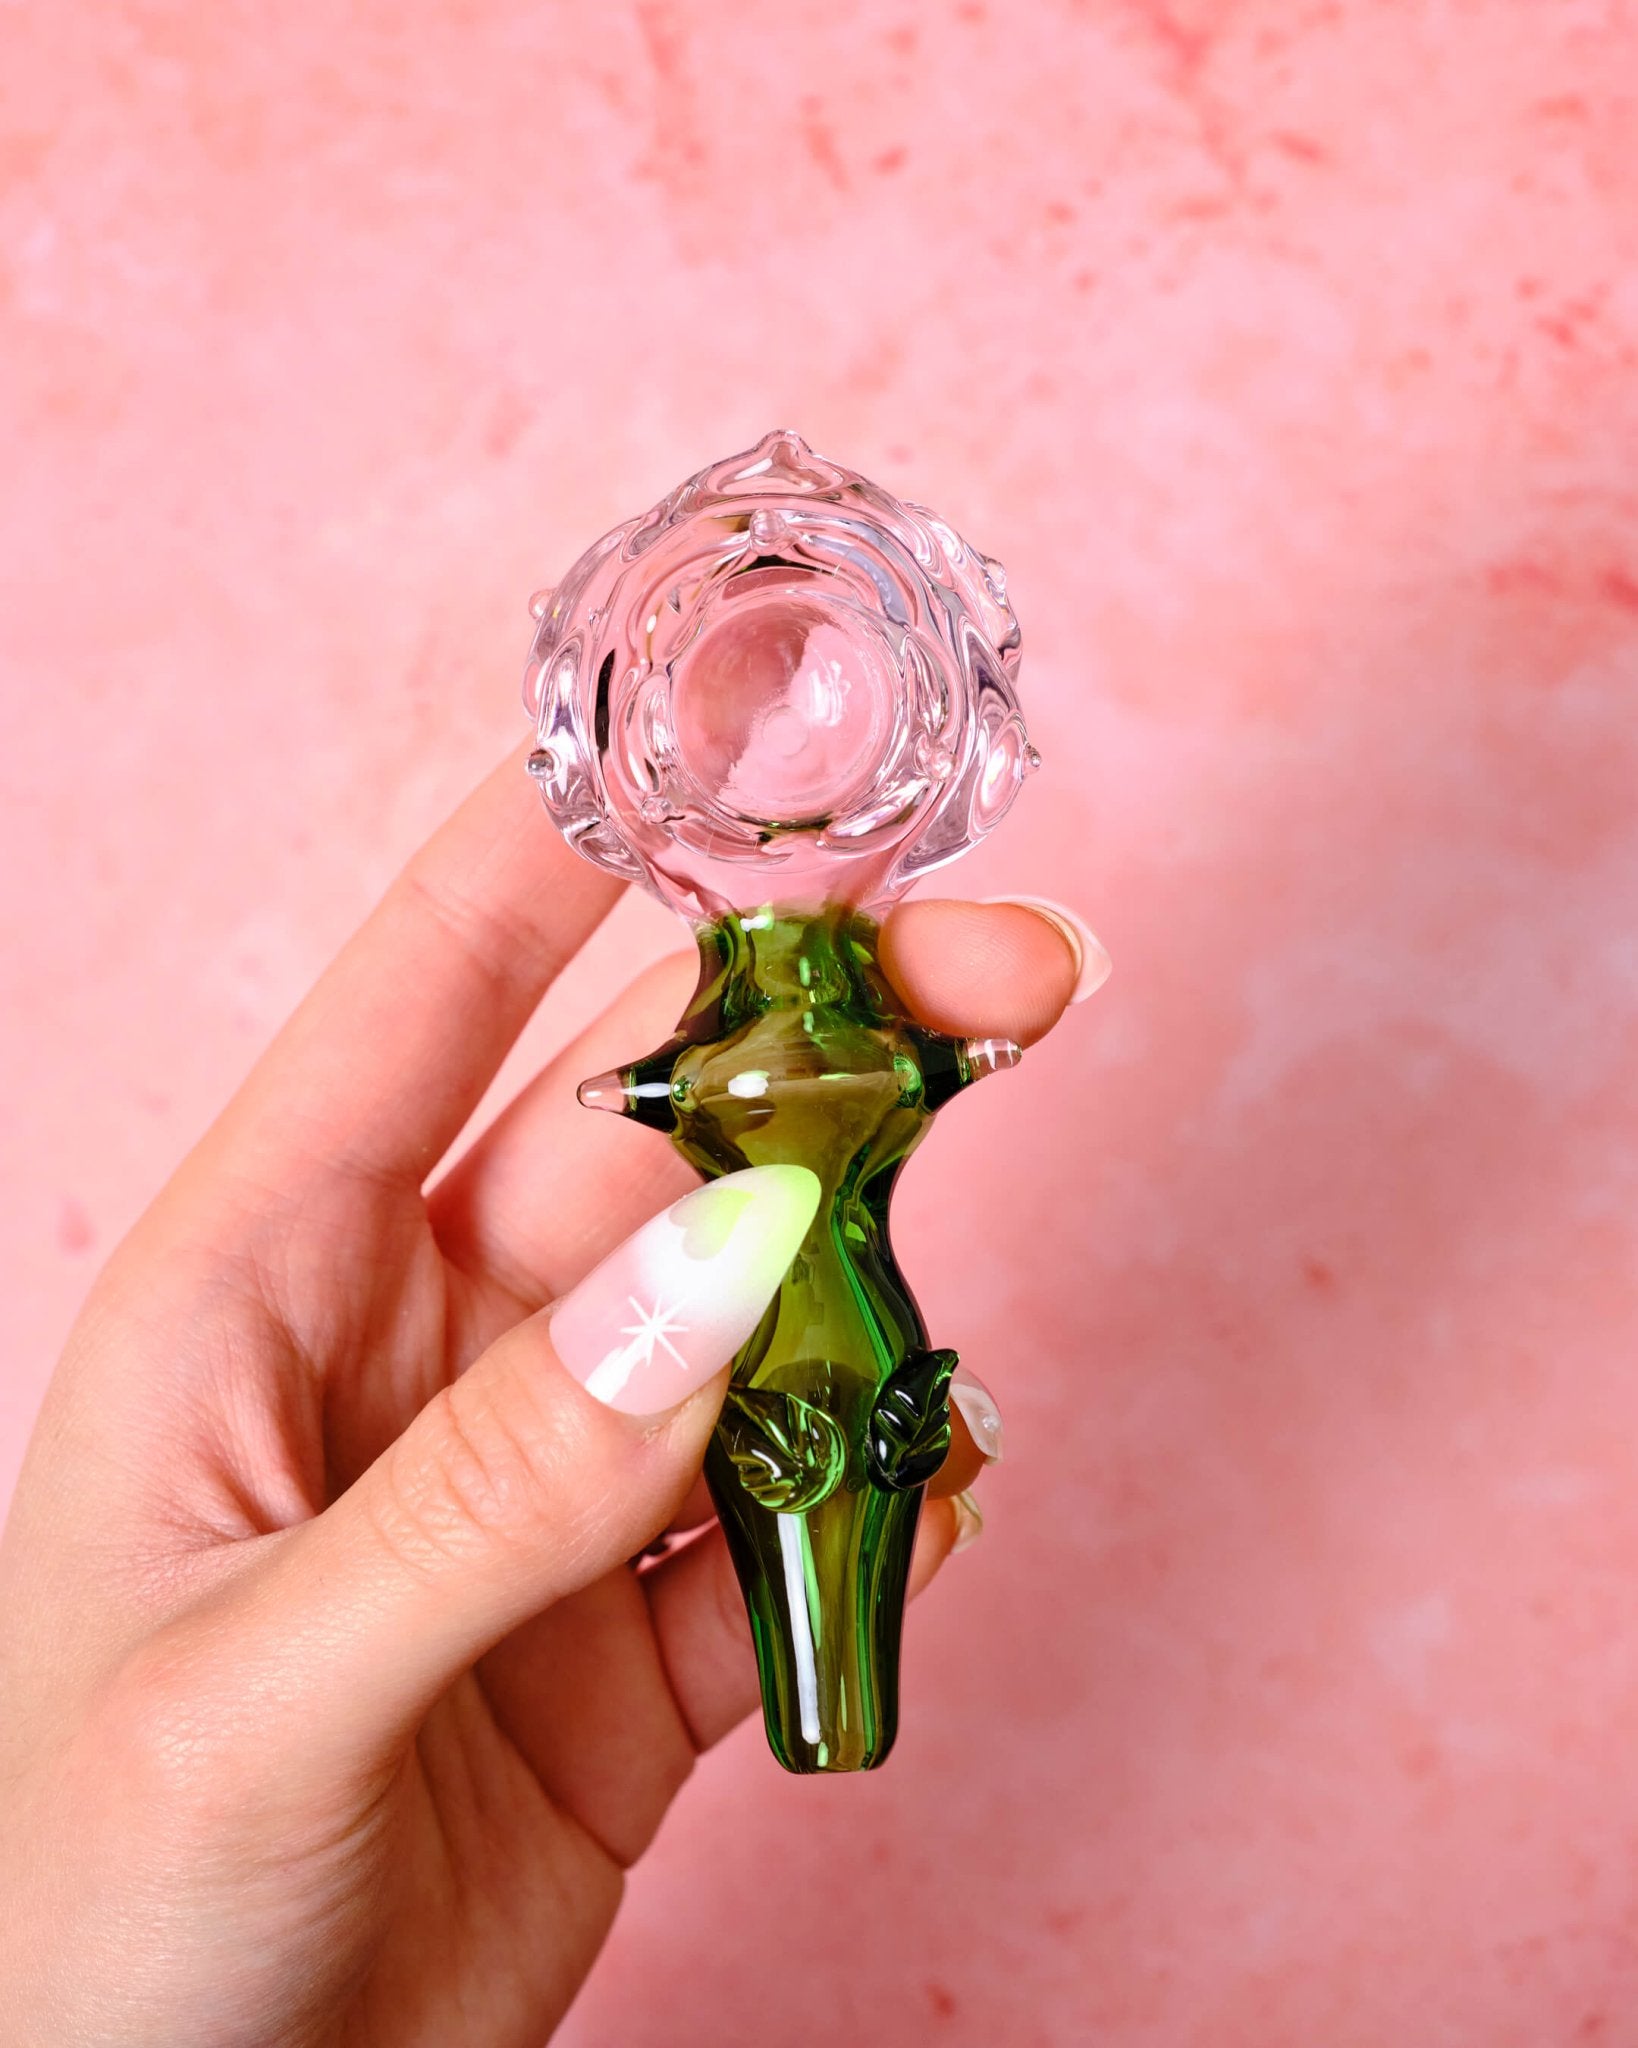 ROSE PIPE - Summer Sunset - rose shaped glass pipe, pink and green color